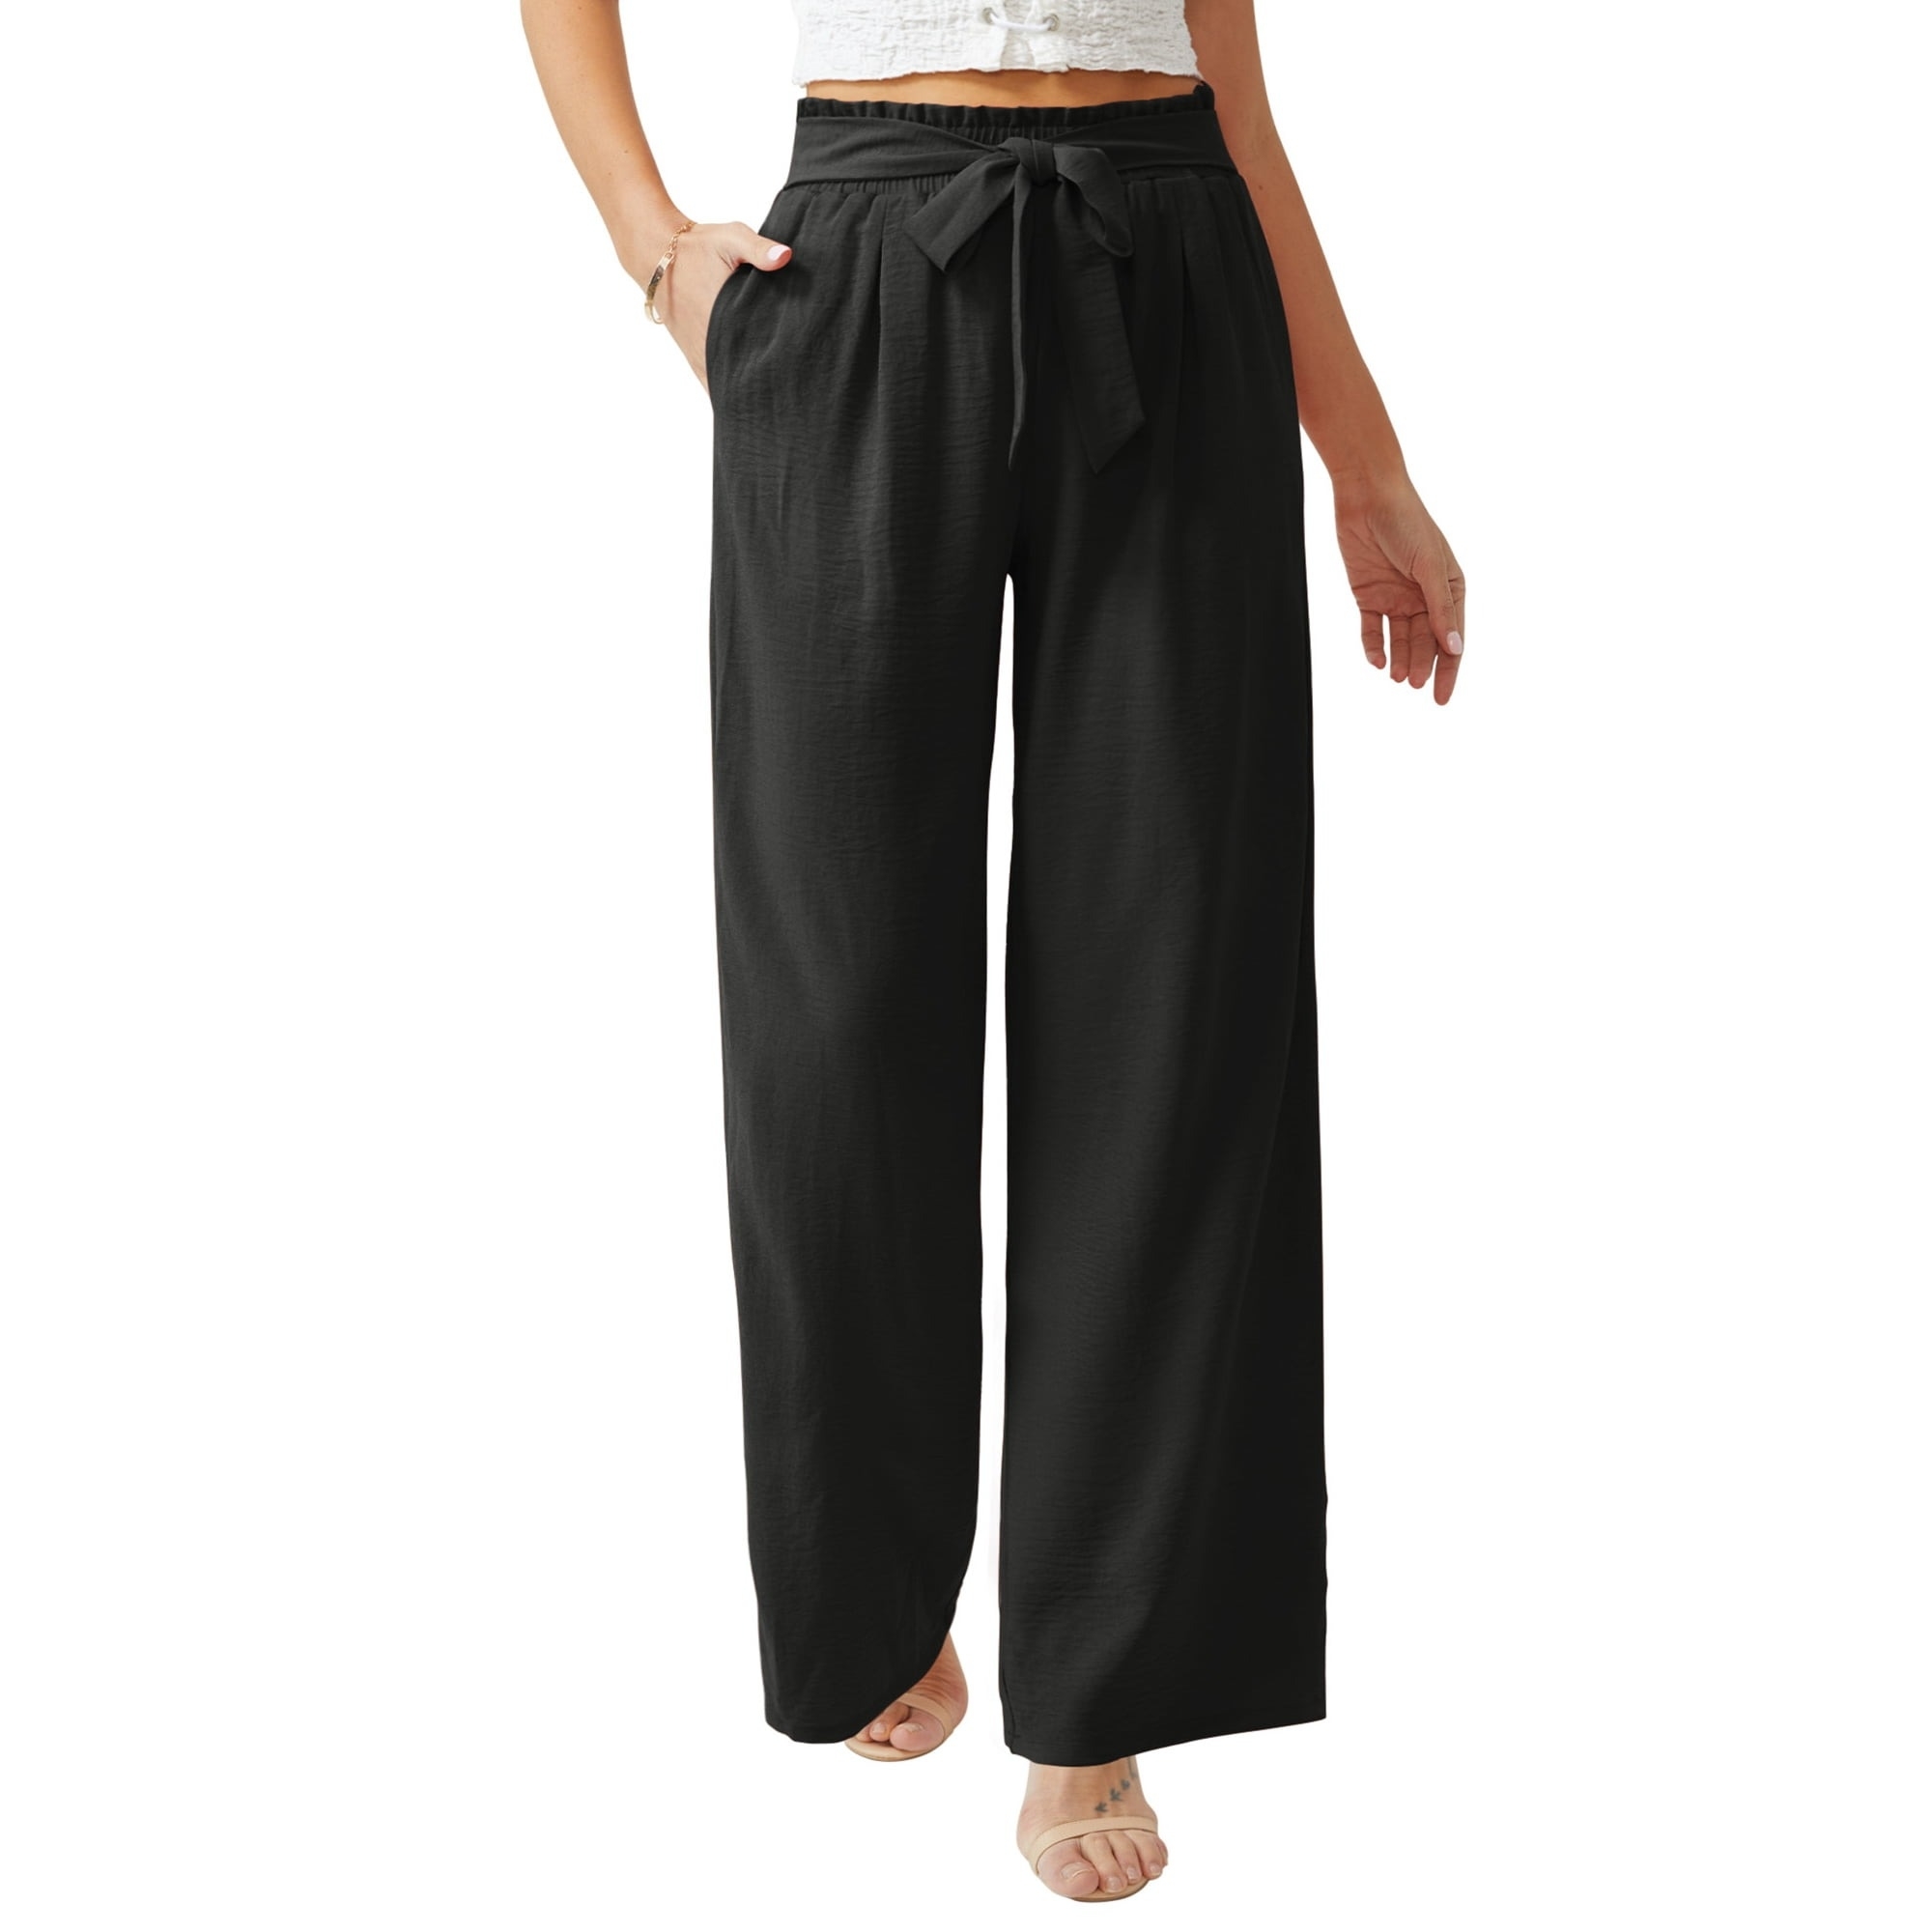 Wide legs palazzo pants with tie waist on model